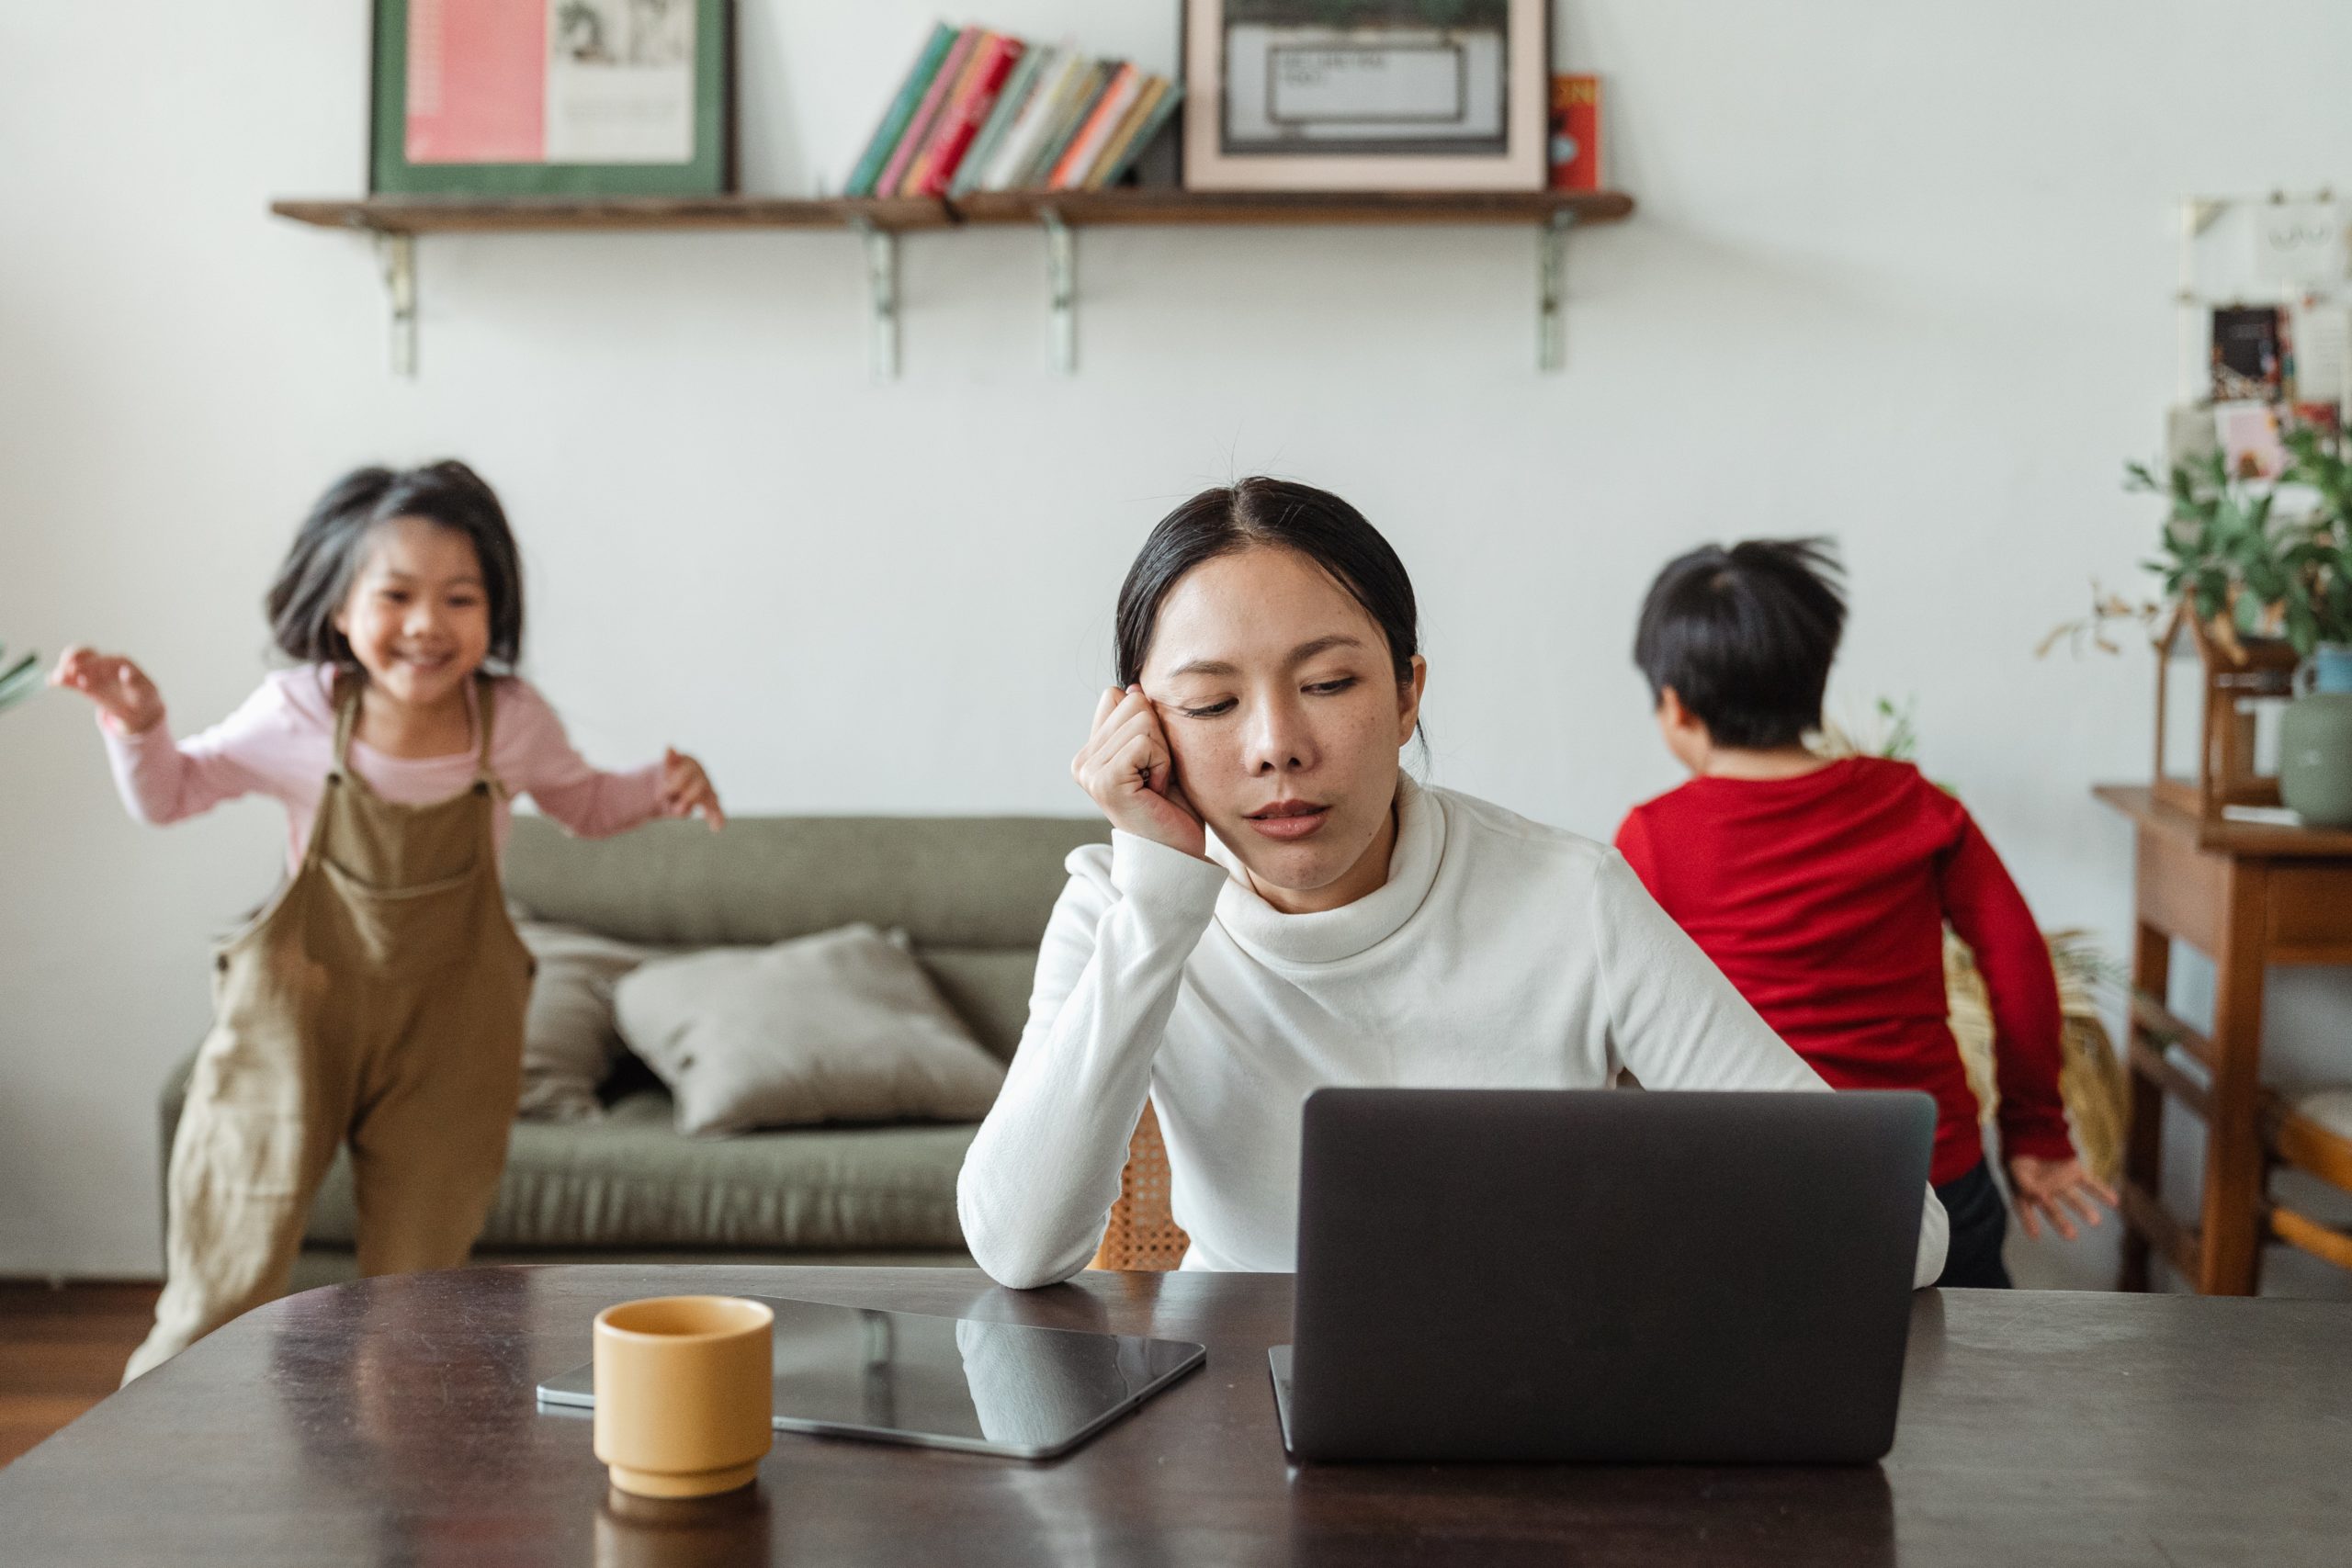 Mother at laptop overwhelmed by noisy, wild children in background